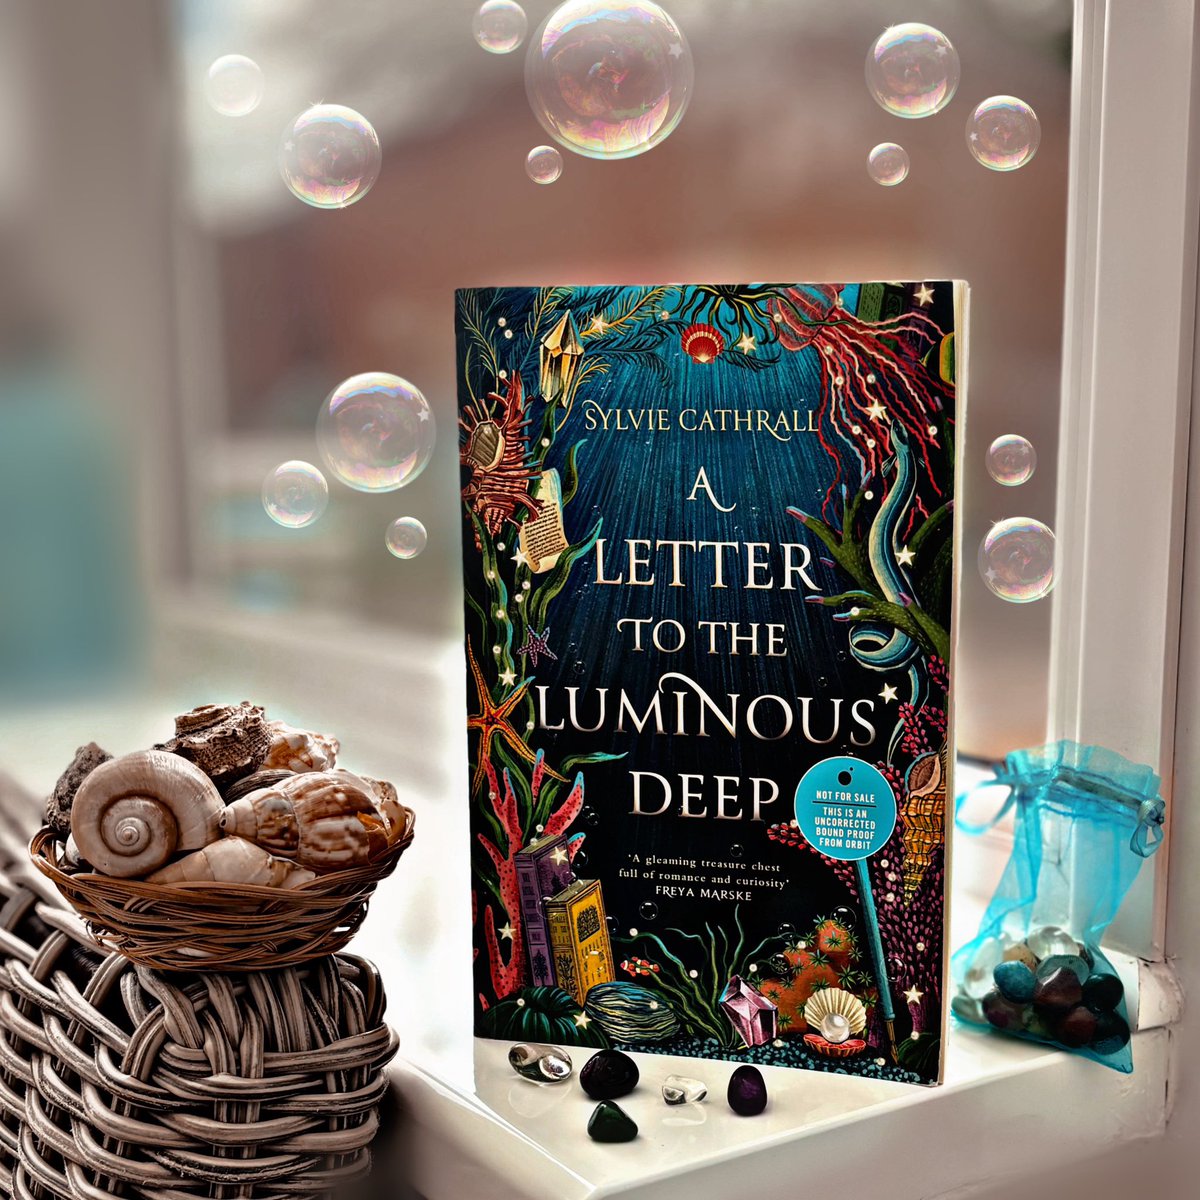 Happy Book Birthday to @SylvieCathrall A Letter to the Luminous Deep is out today! Here’s my review again from @TheFantasyHive Link: fantasy-hive.co.uk/2023/12/a-lett… And if you’d like to know more about this gorgeous book I’ll be interviewing Sylvie on The Fantasy Hive later today too!